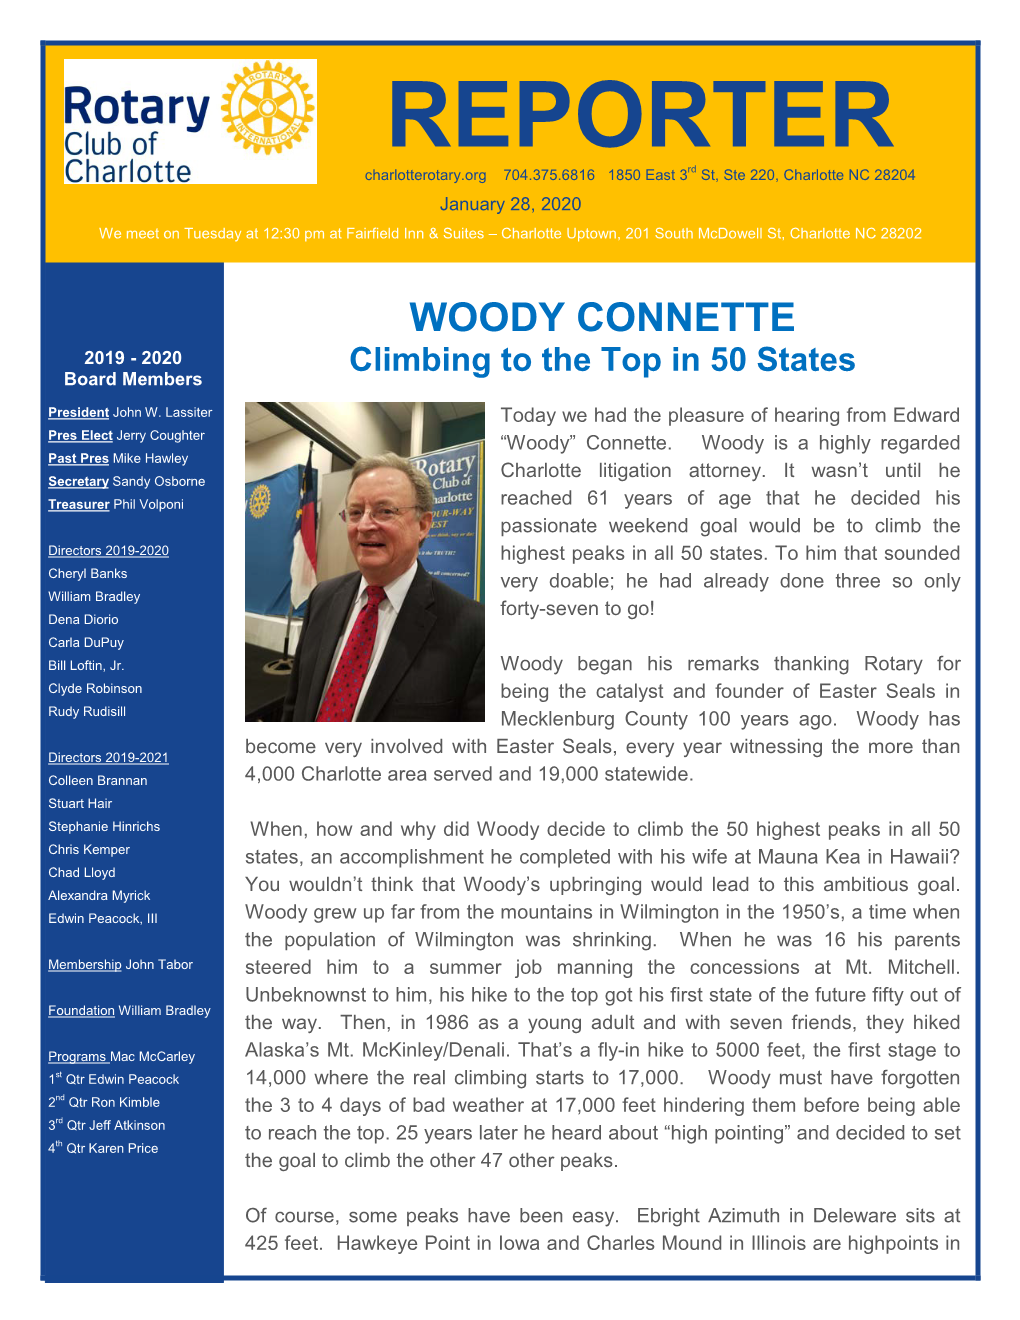 Woody Connette, Climbing to the Top in 50 States